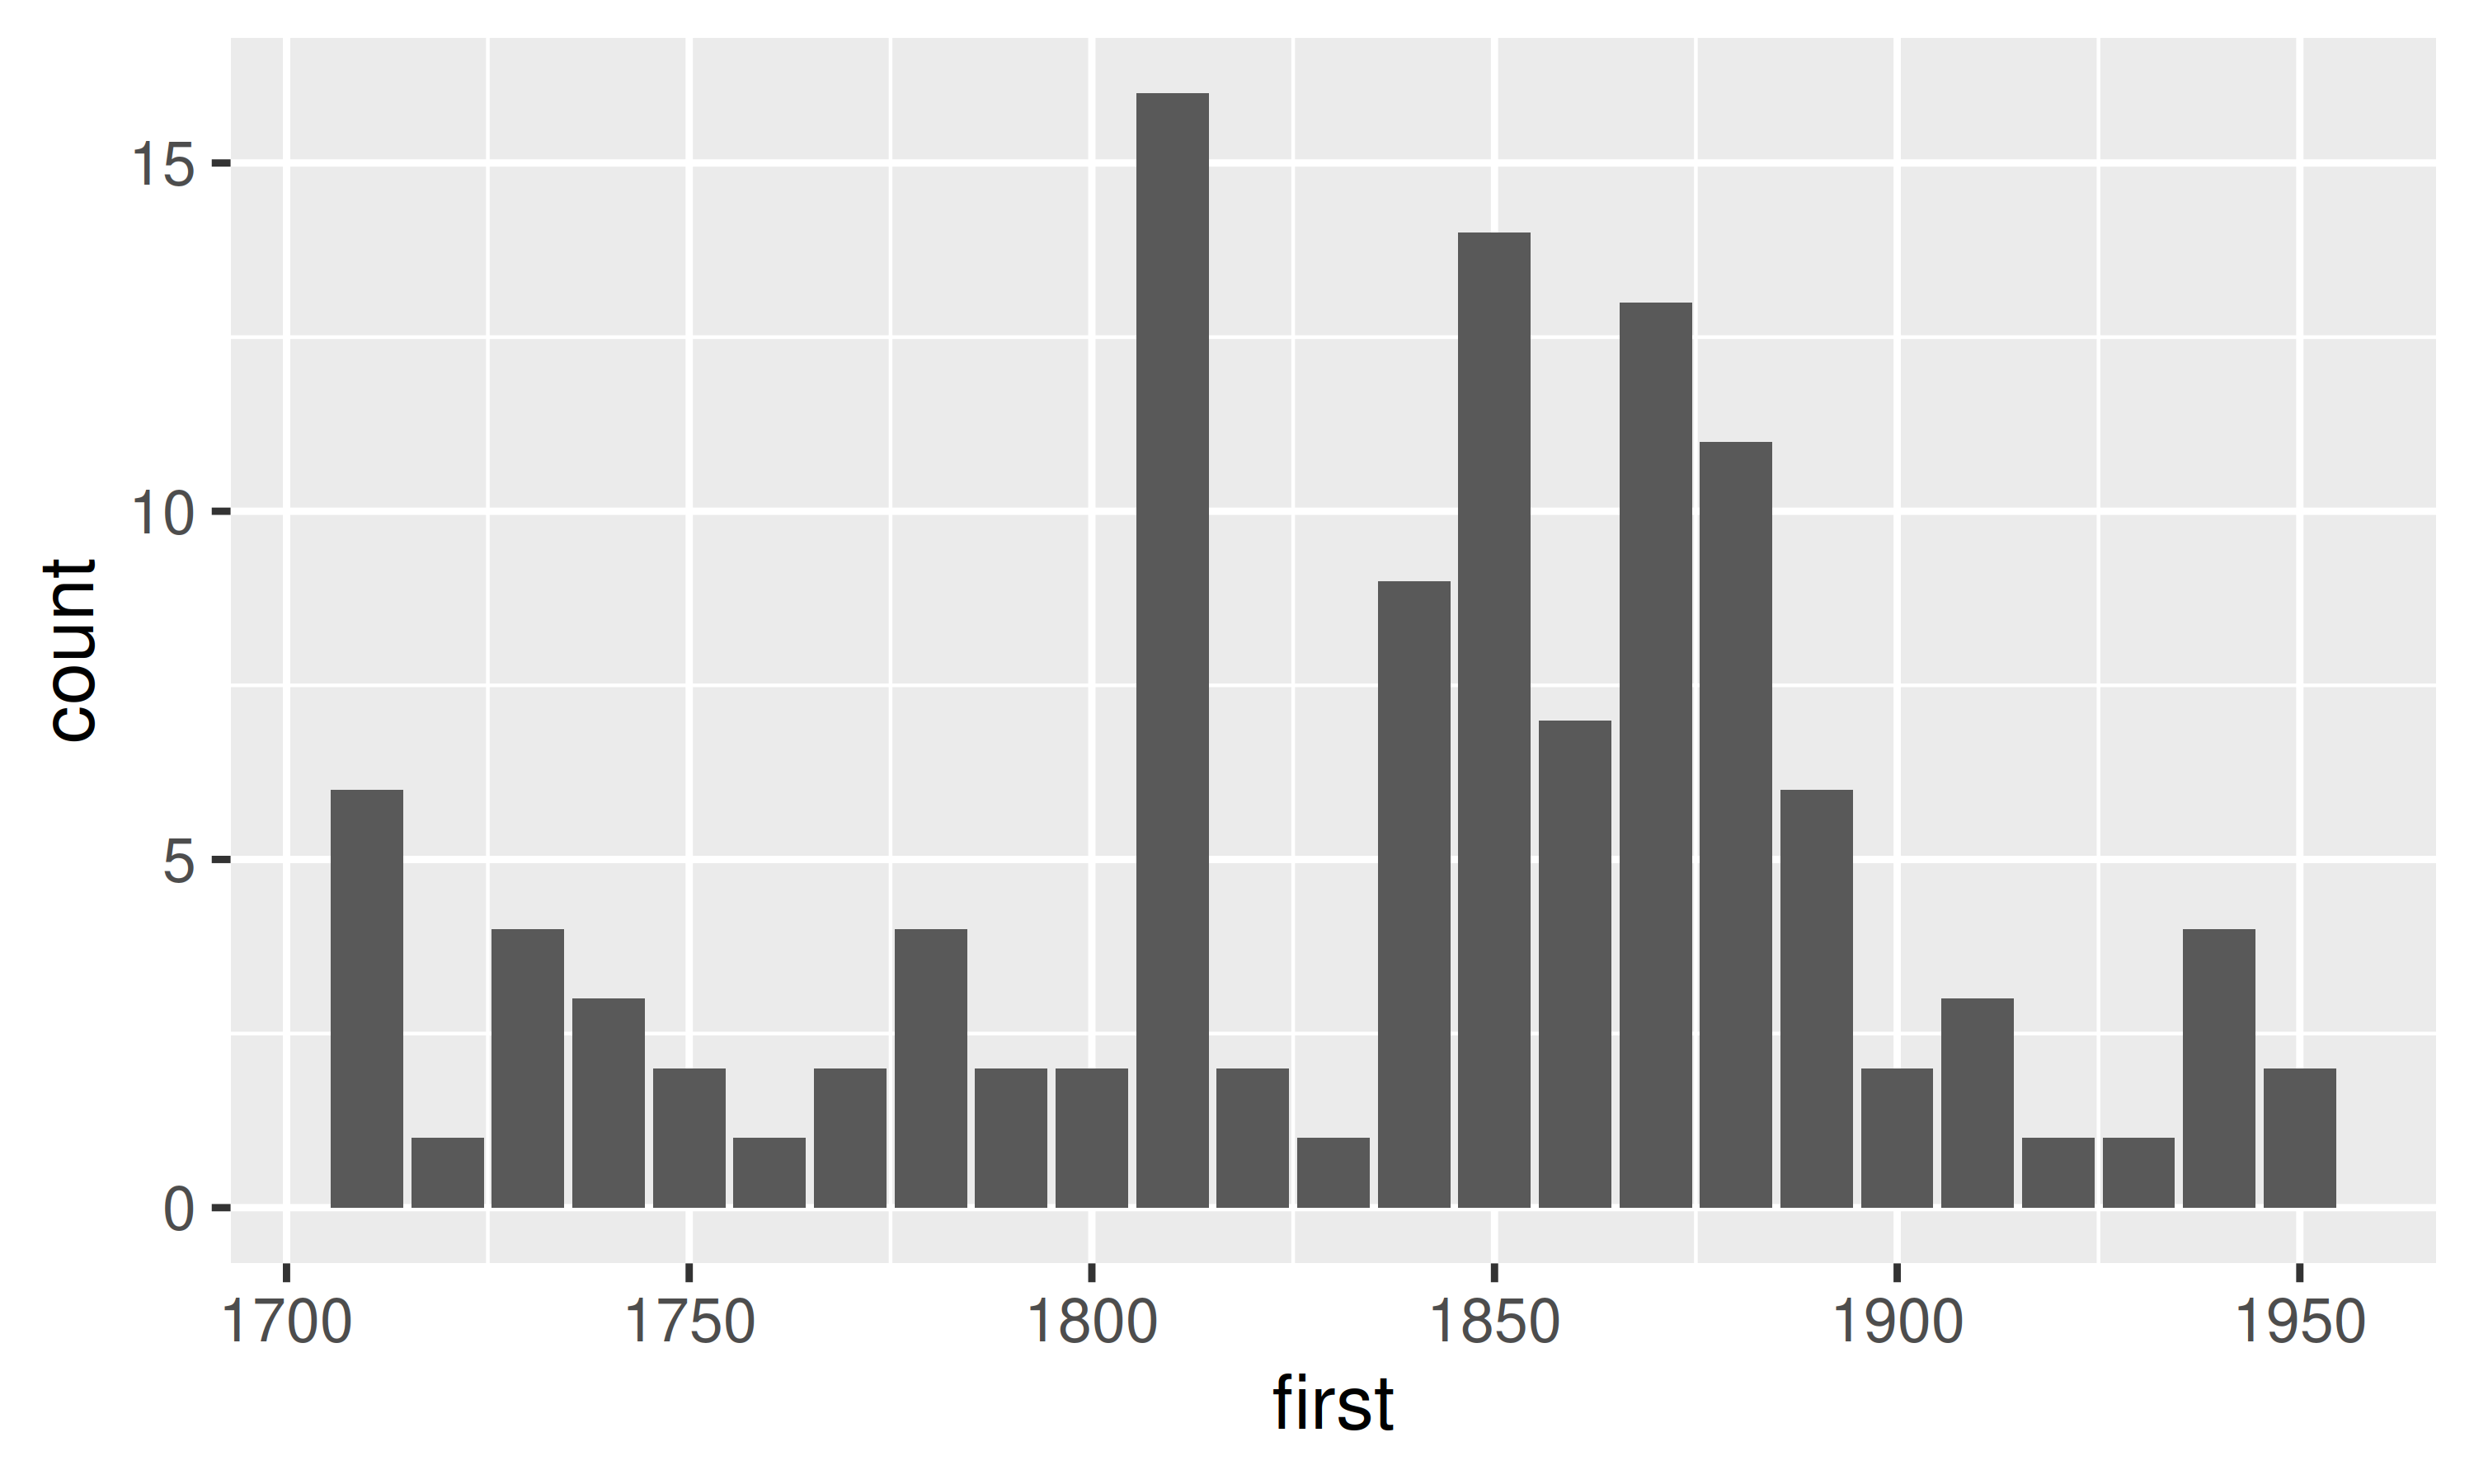 Distribution of starting years of measurement. The data is already binned into 10 year blocks. Most of the years start between 1840 and 1900.